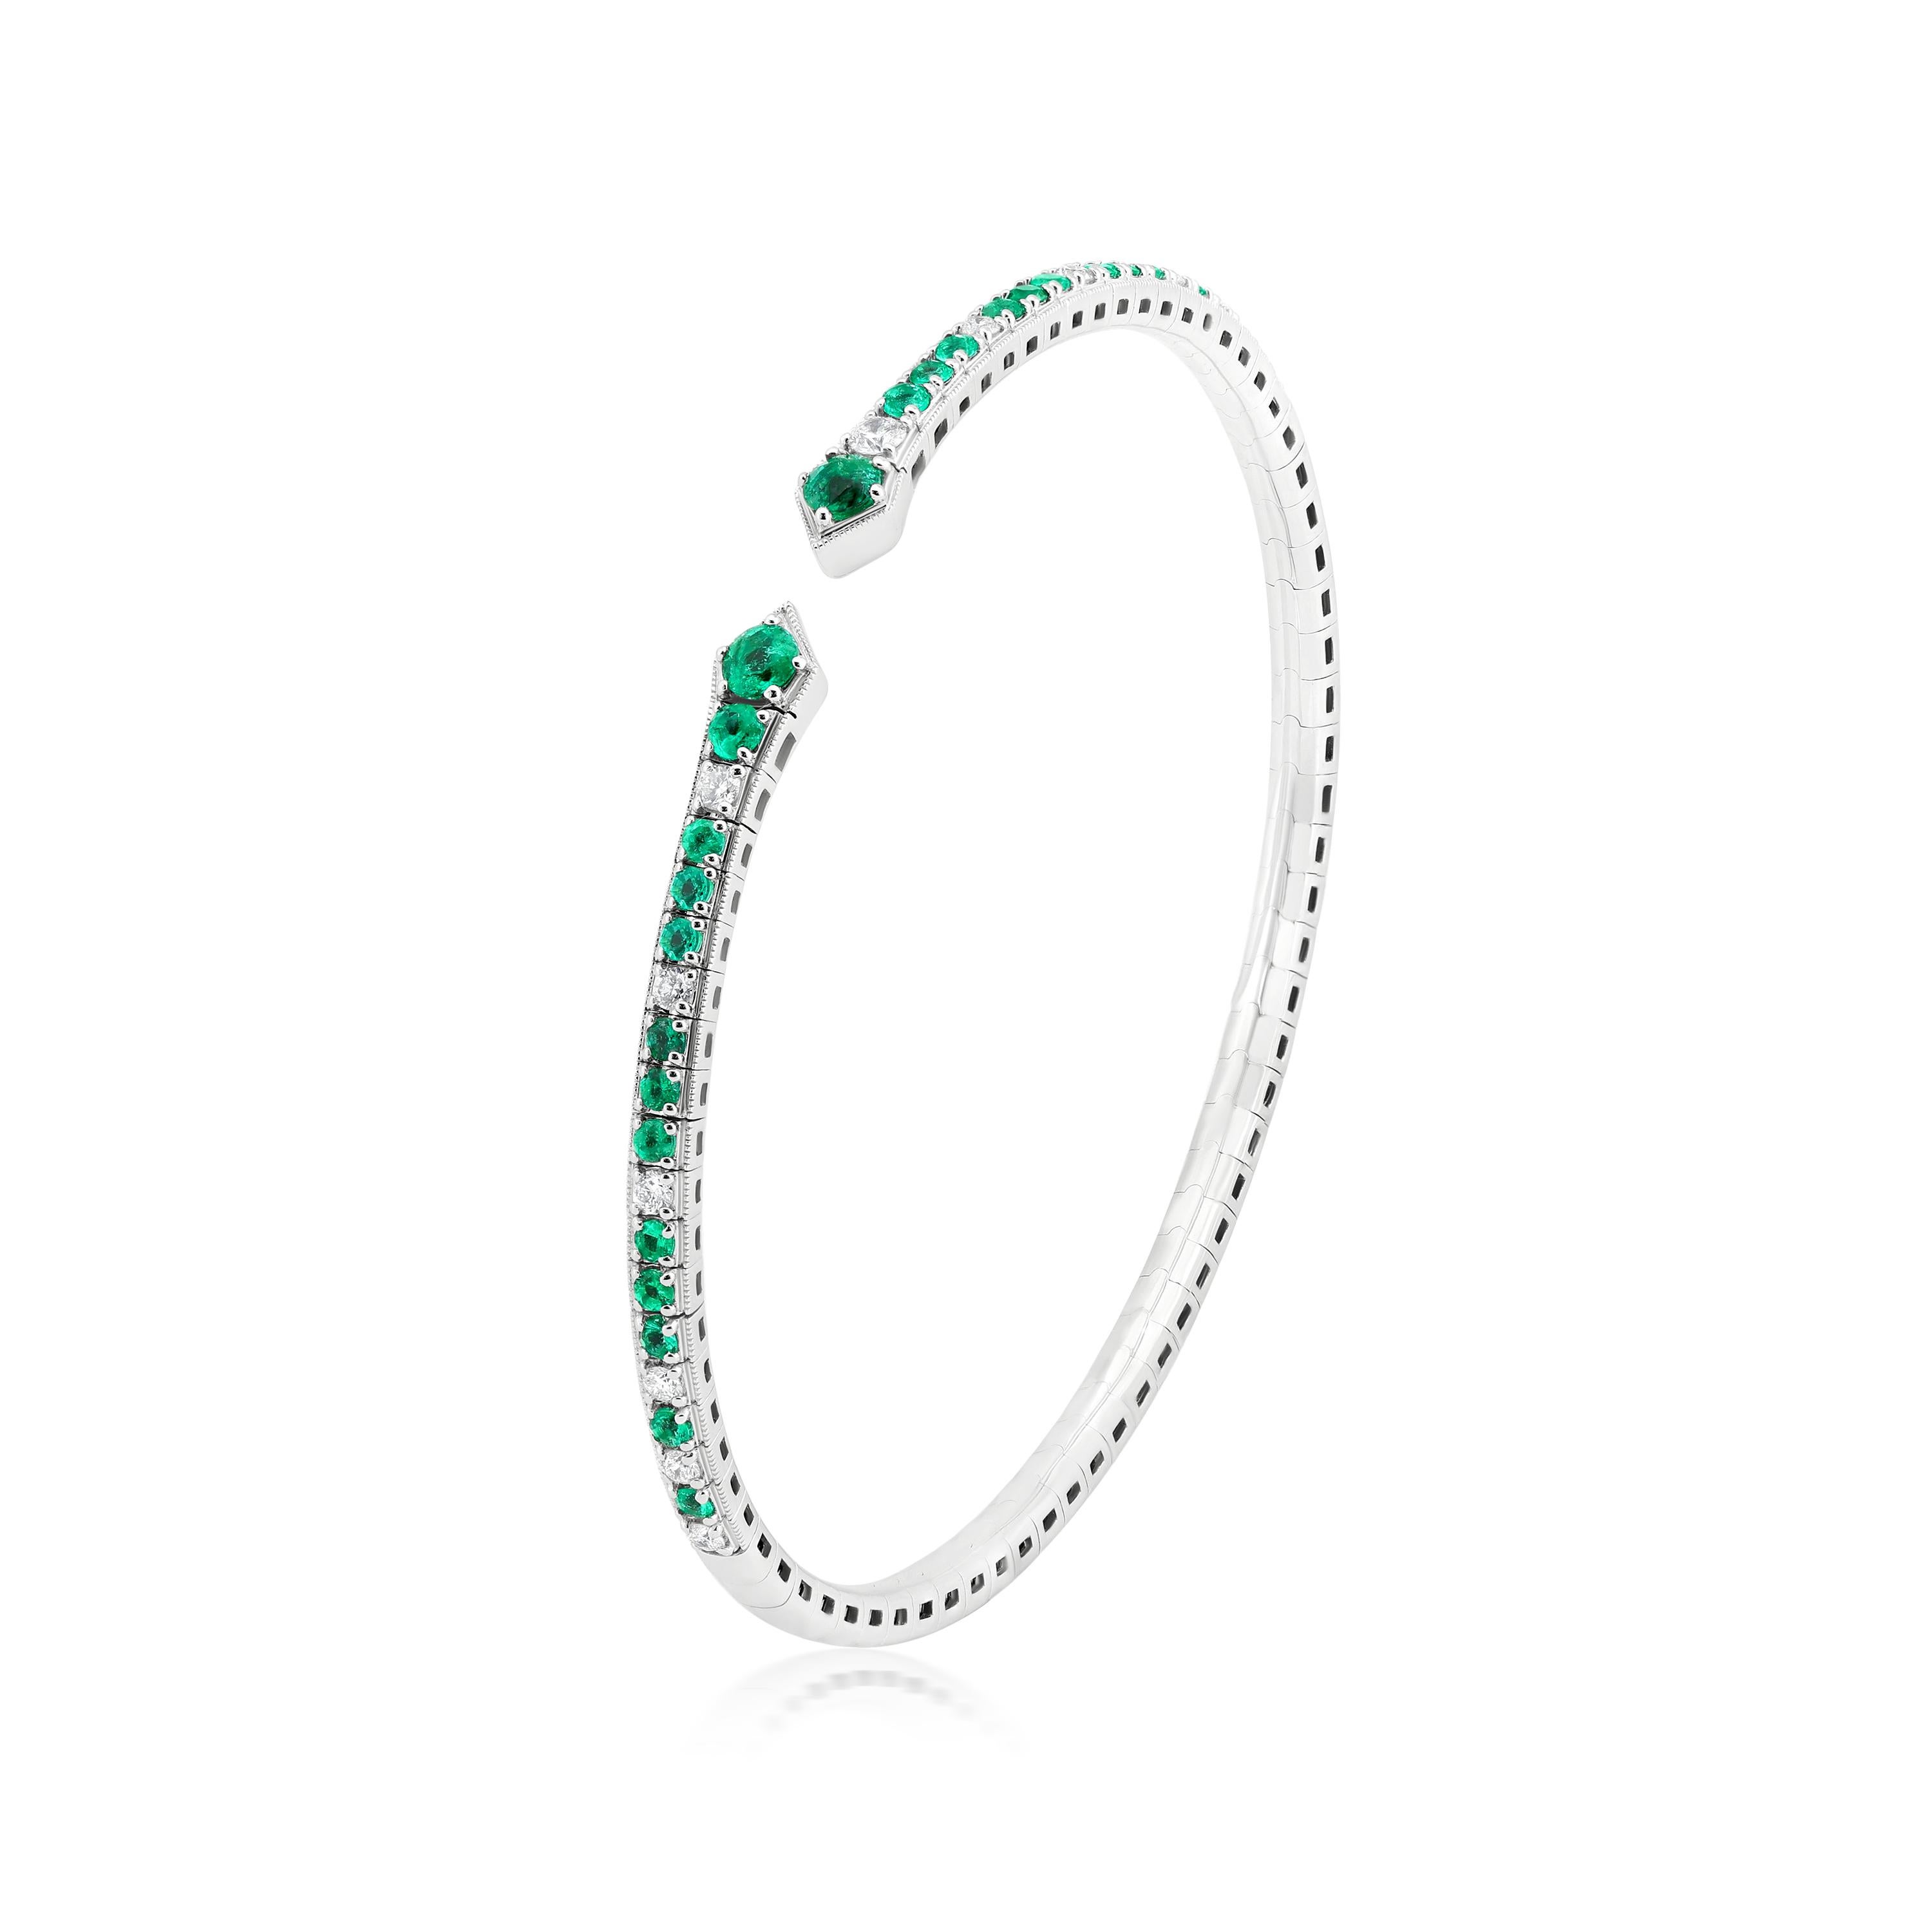 Luxle 1.39 Cttw. Emerald and Diamond Serpentine Cuff Bracelets in 18k White Gold In New Condition For Sale In New York, NY